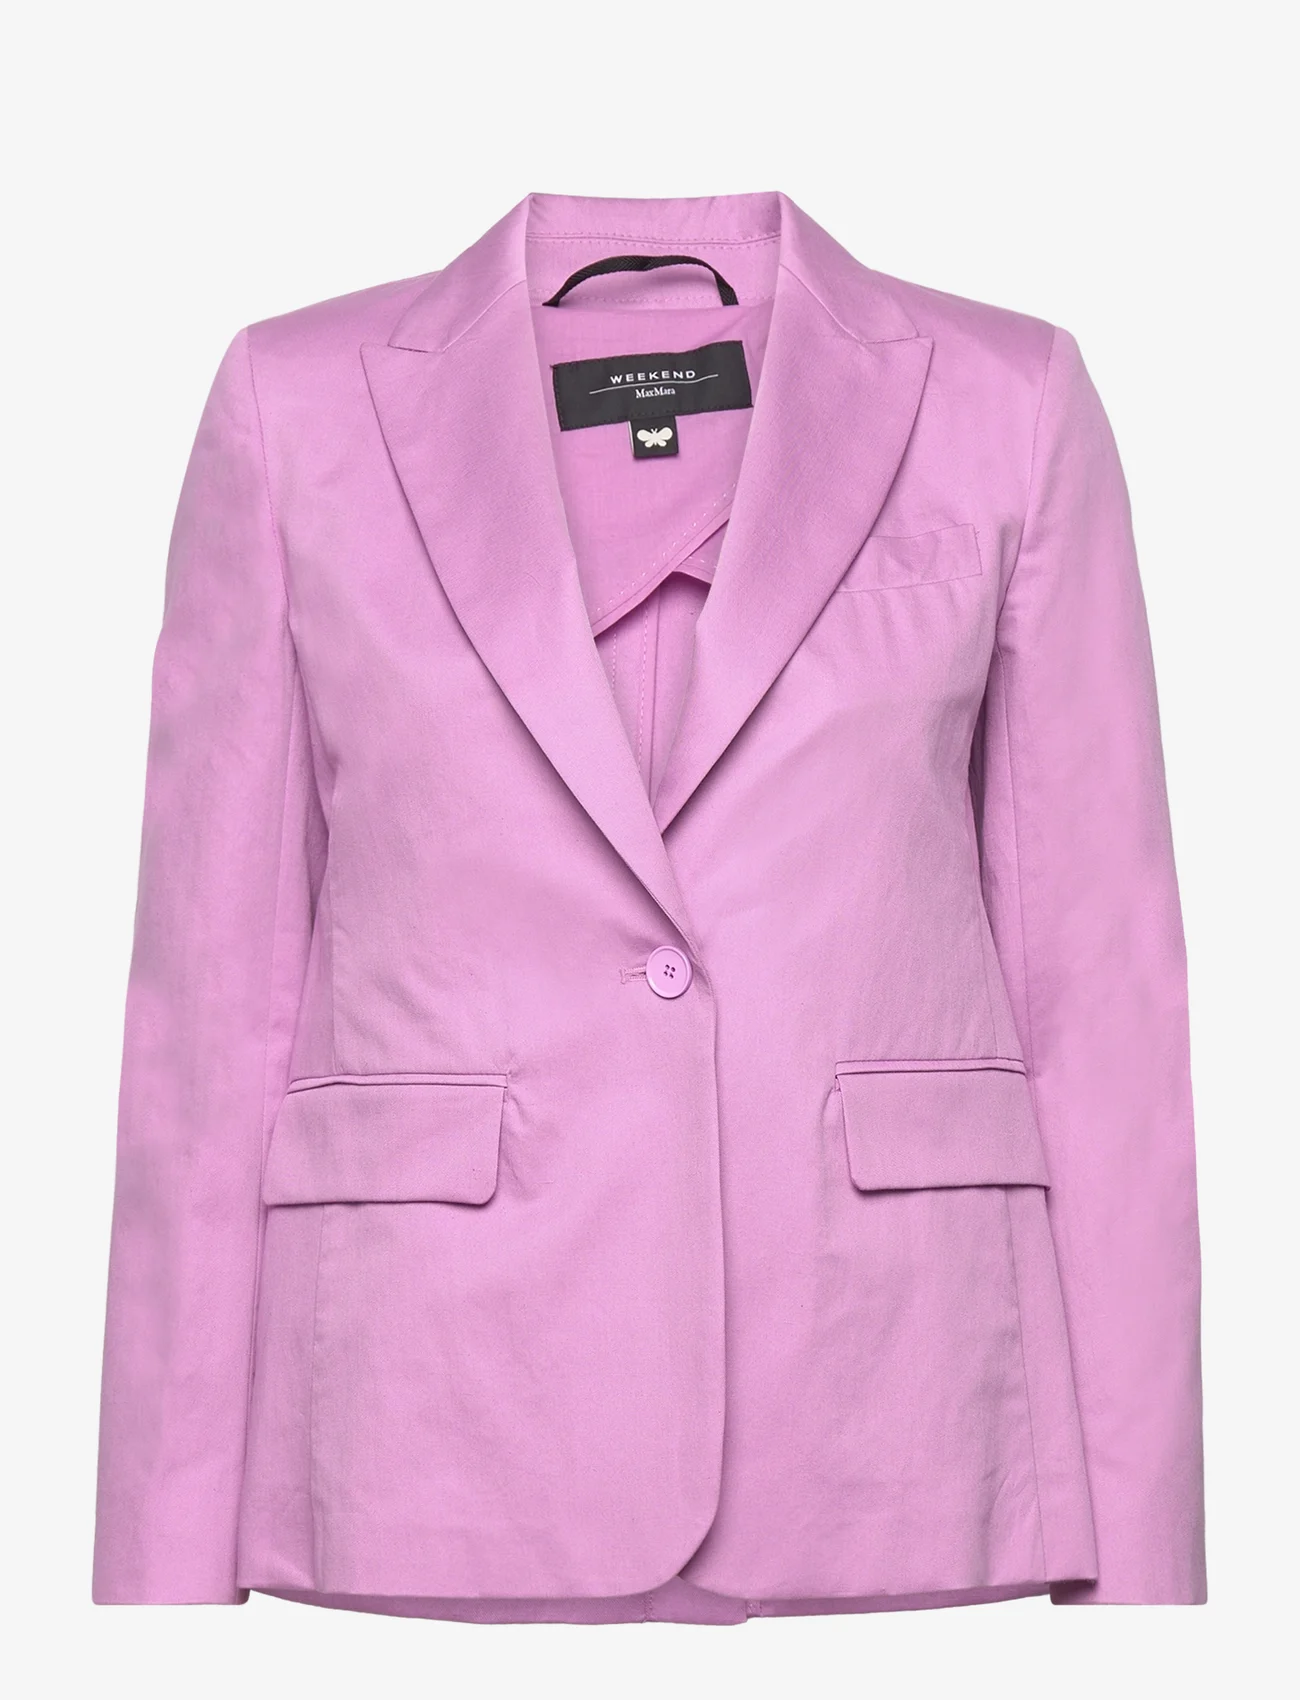 Weekend Max Mara - GELOSIA - party wear at outlet prices - lilac - 0